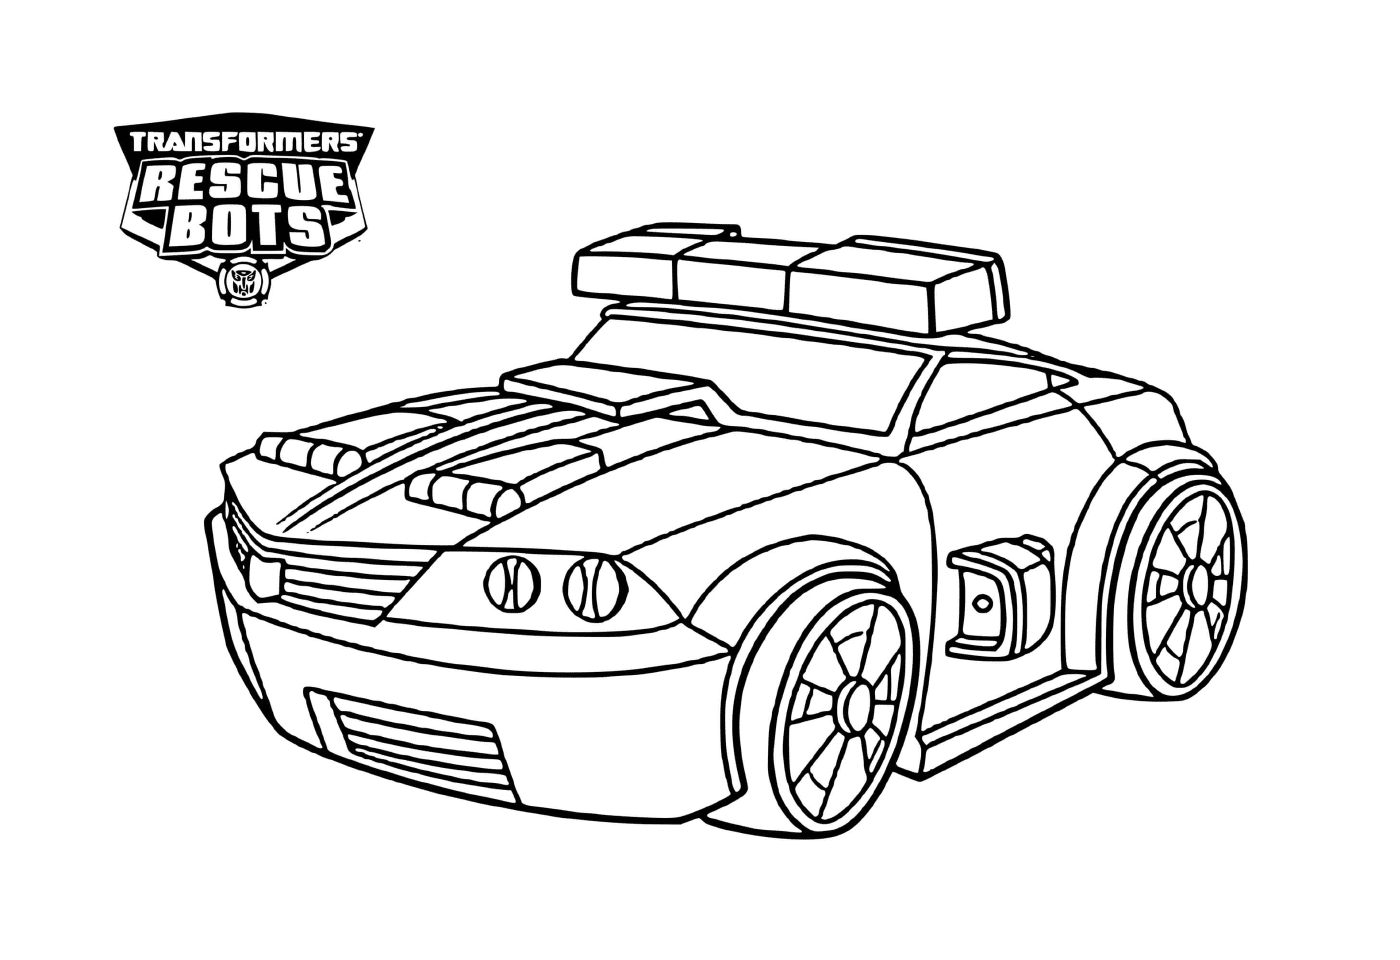  Chase Transformers Police Car 